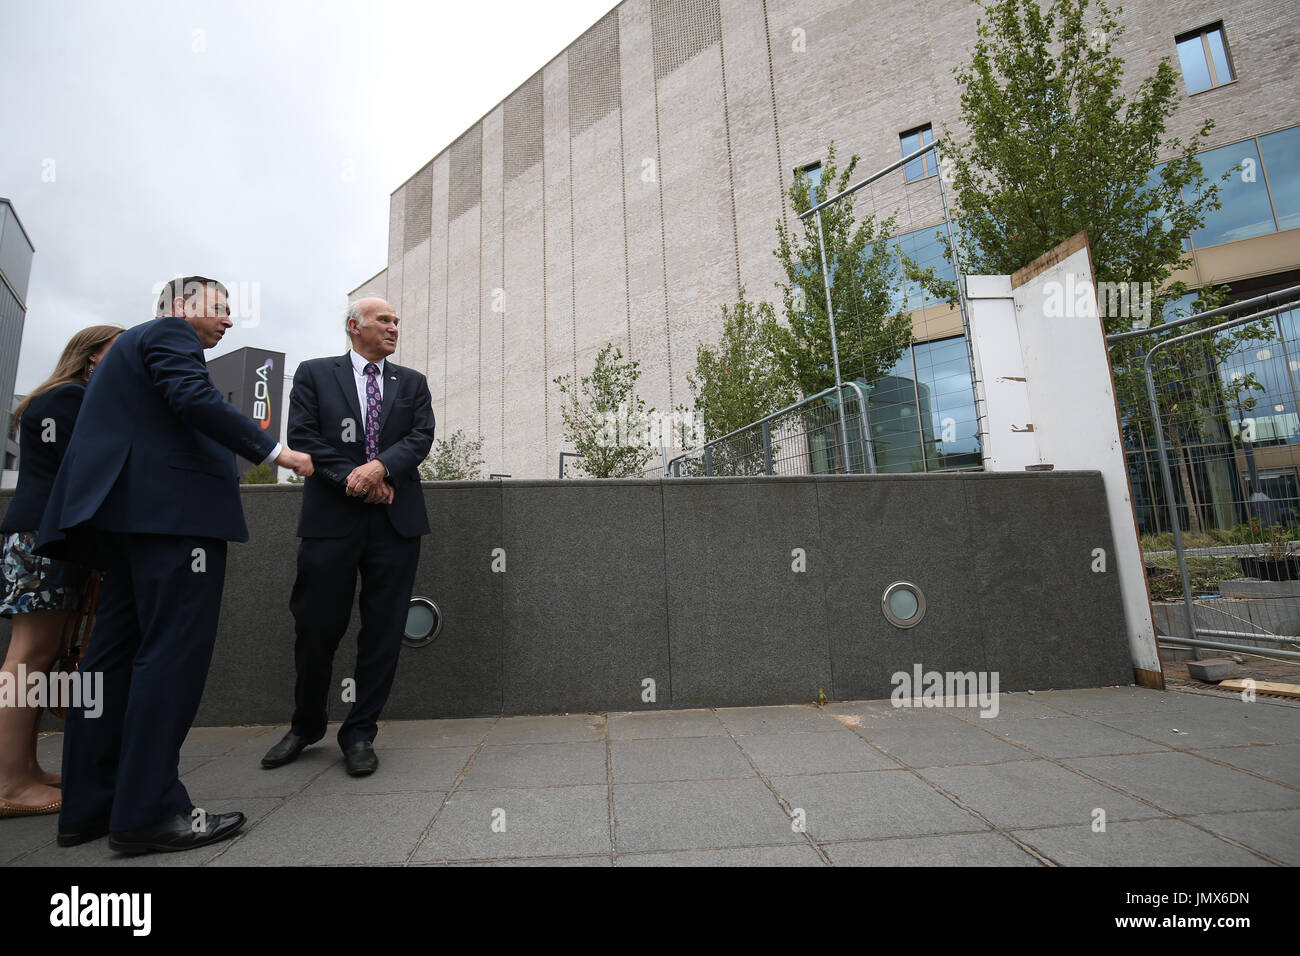 Julian Beer, vice chancellor of Birmingham City University (left) talks to Liberal Democrats leader Sir Vince Cable (right) during a tour of the university after speaking at the university's Centre for Brexit Studies. Stock Photo